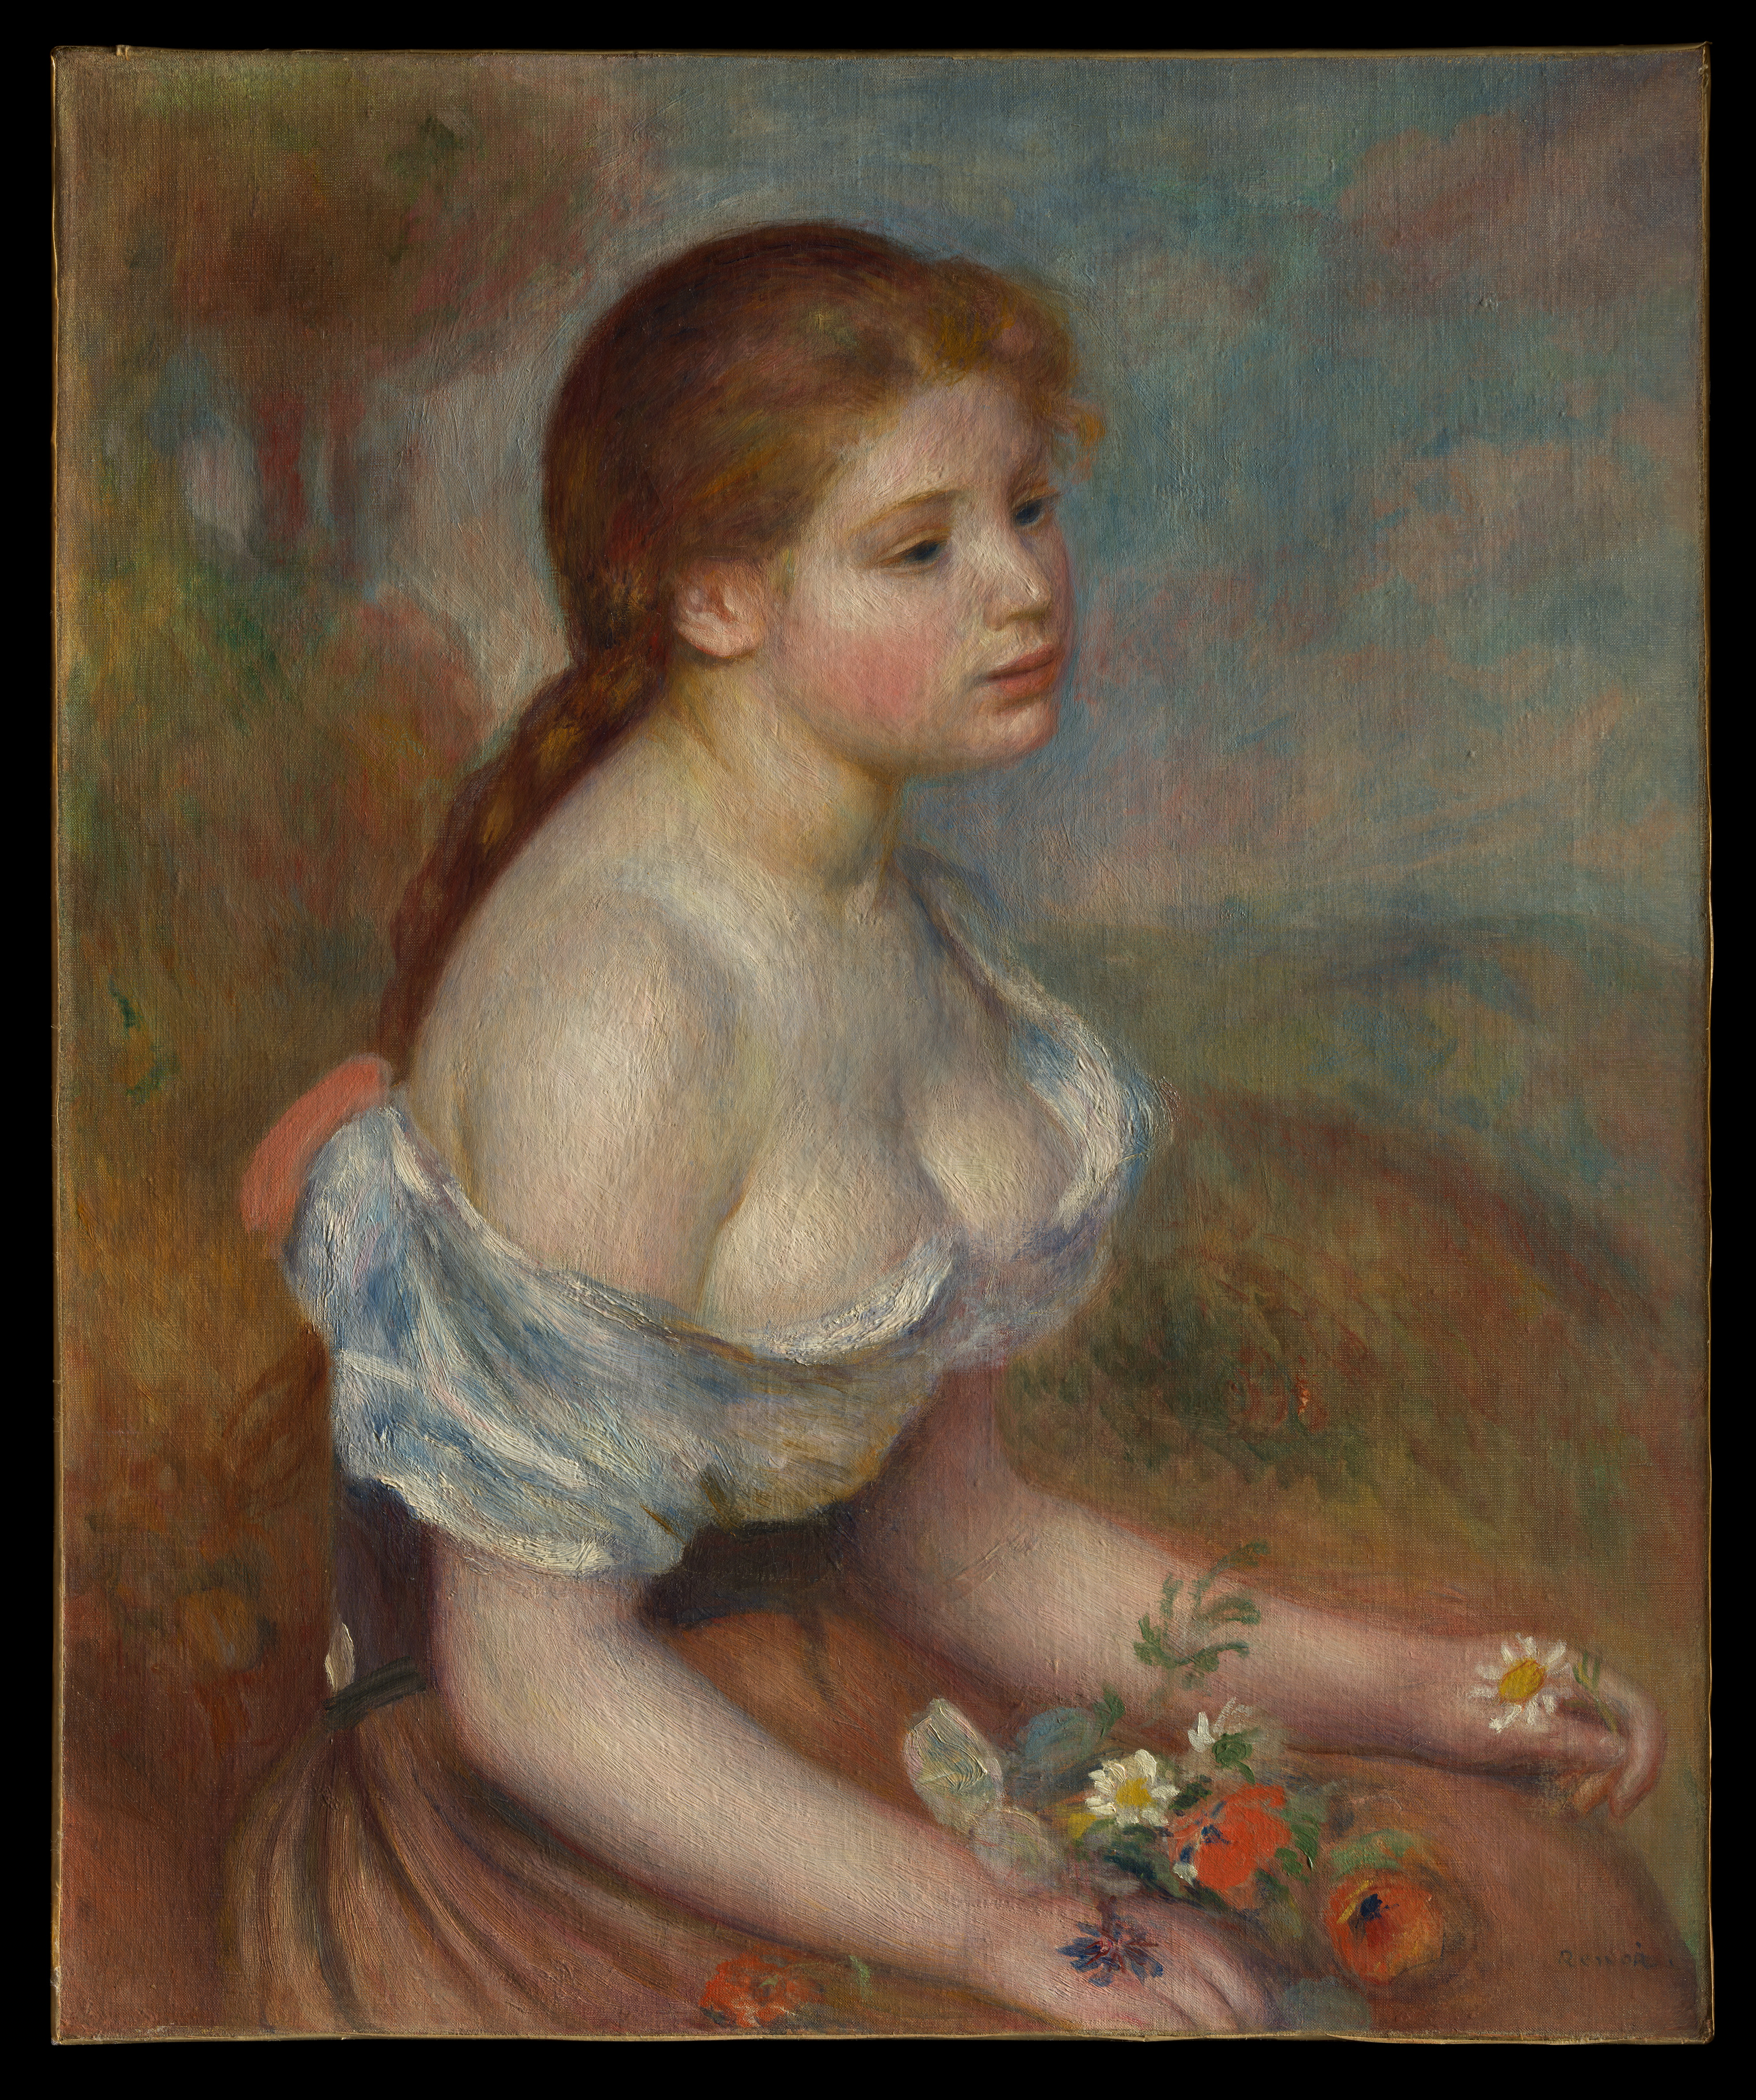 Girl with a Red Hair Ribbon by Pierre Auguste Renoir Reproduction For Sale